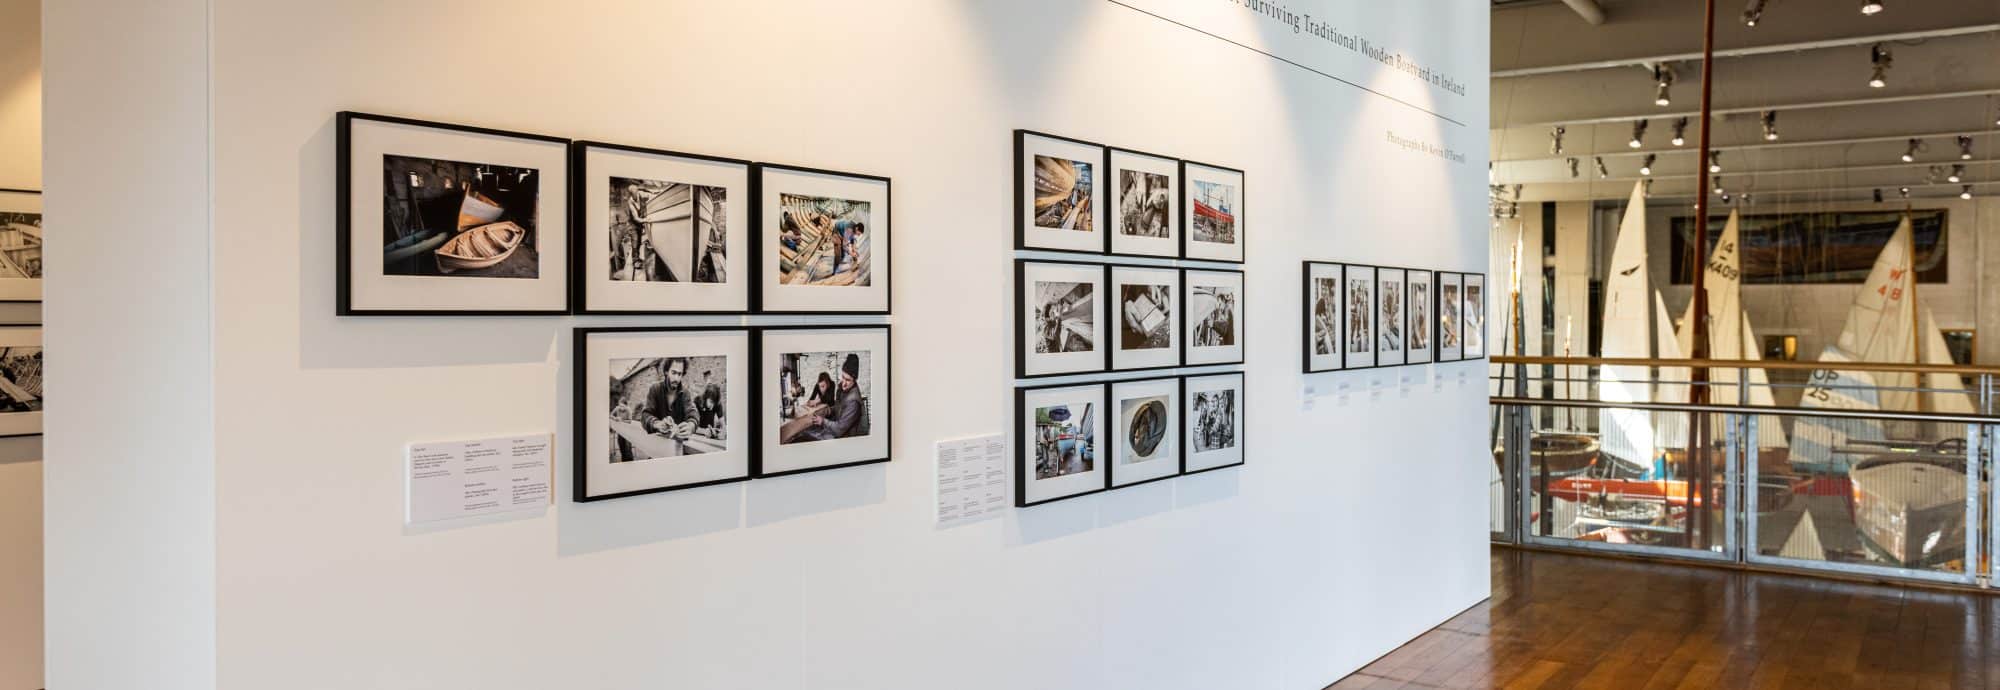 A wall of framed photos on display as part of the Museum's 'Hegarty’s Boatyard' exhibition.